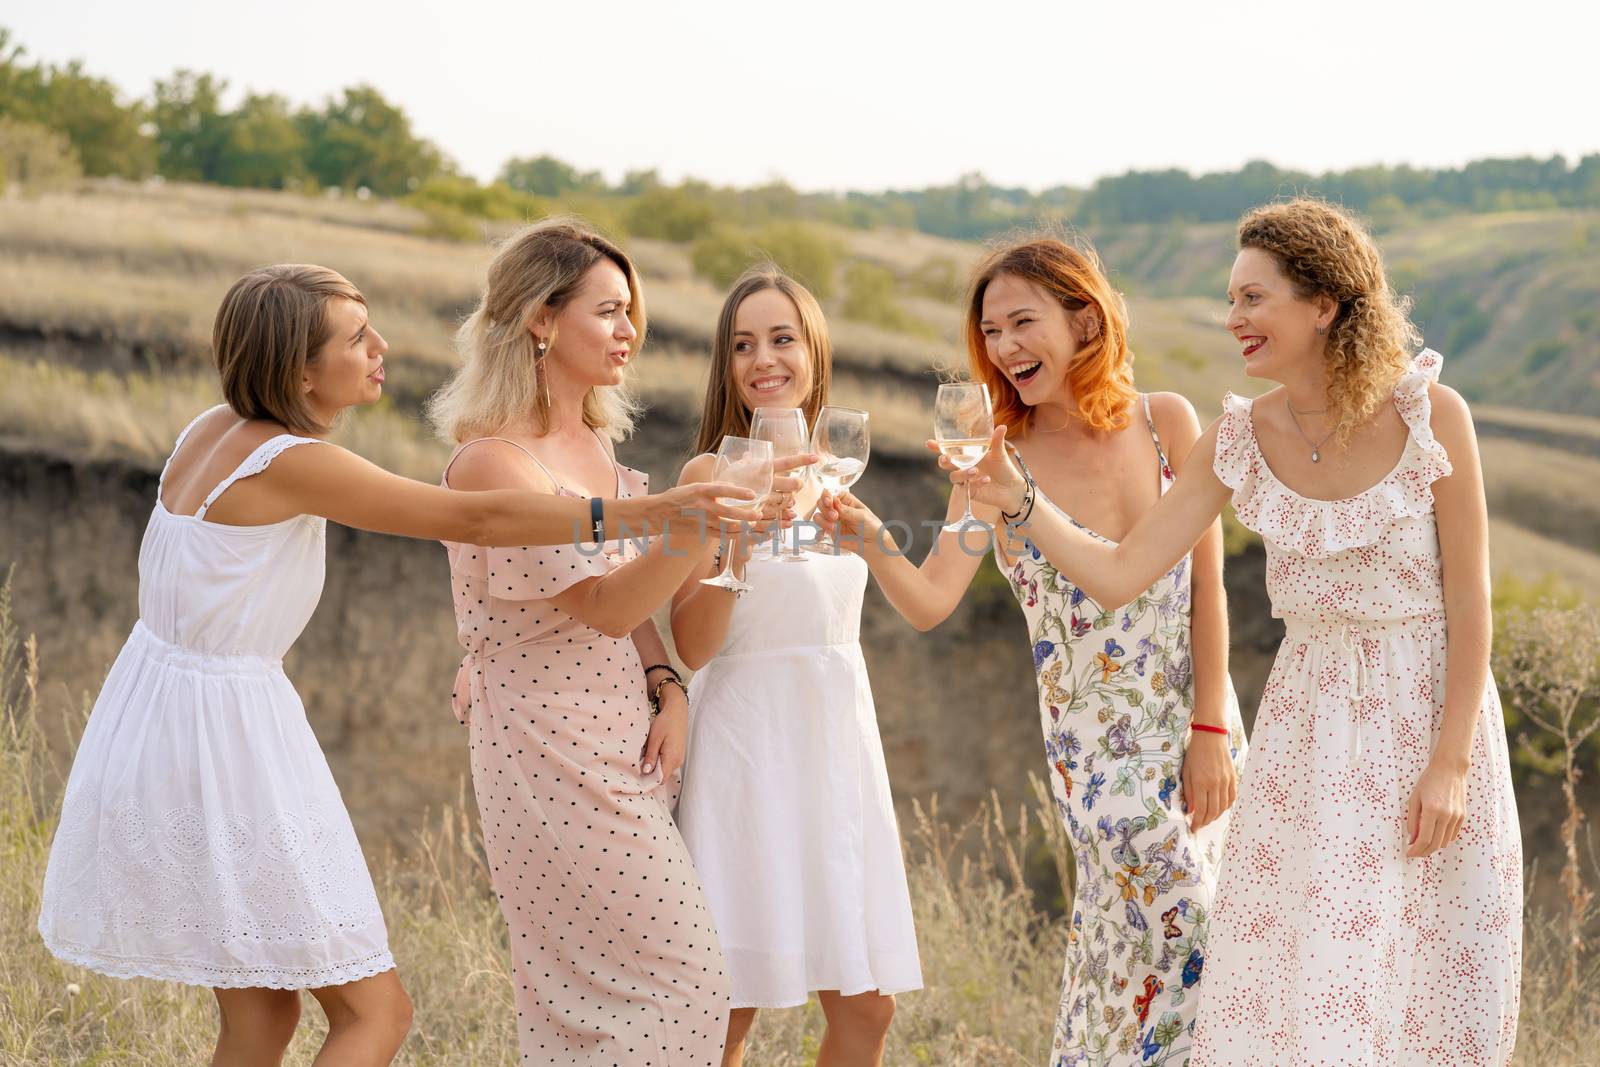 The company of female friends enjoys a summer picnic and raise glasses with wine by Try_my_best